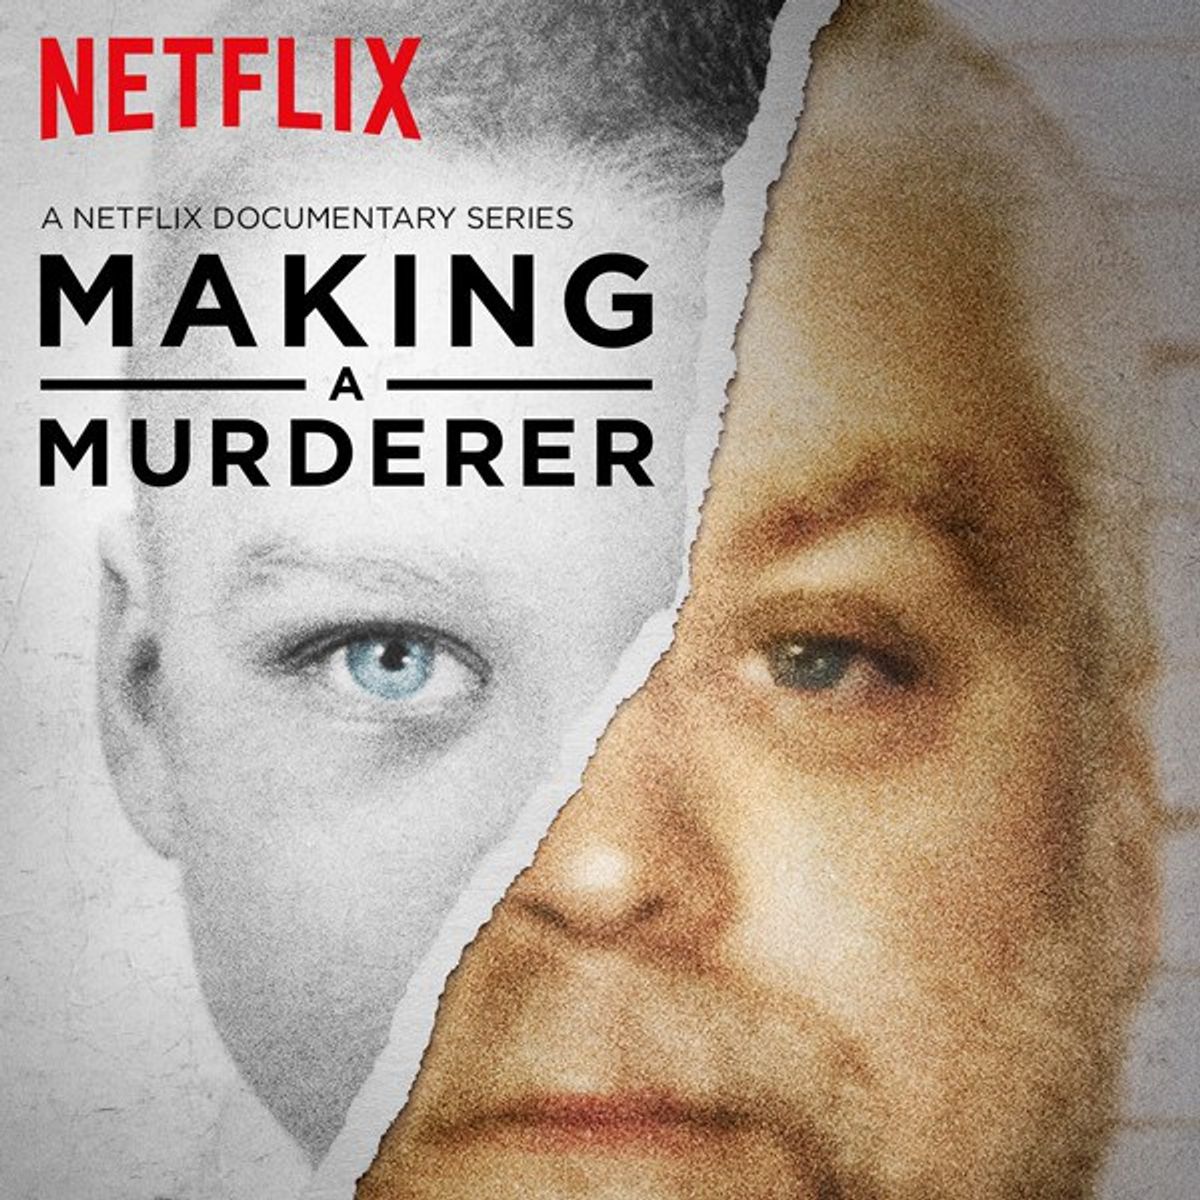 The Ethics of 'Making A Murderer'